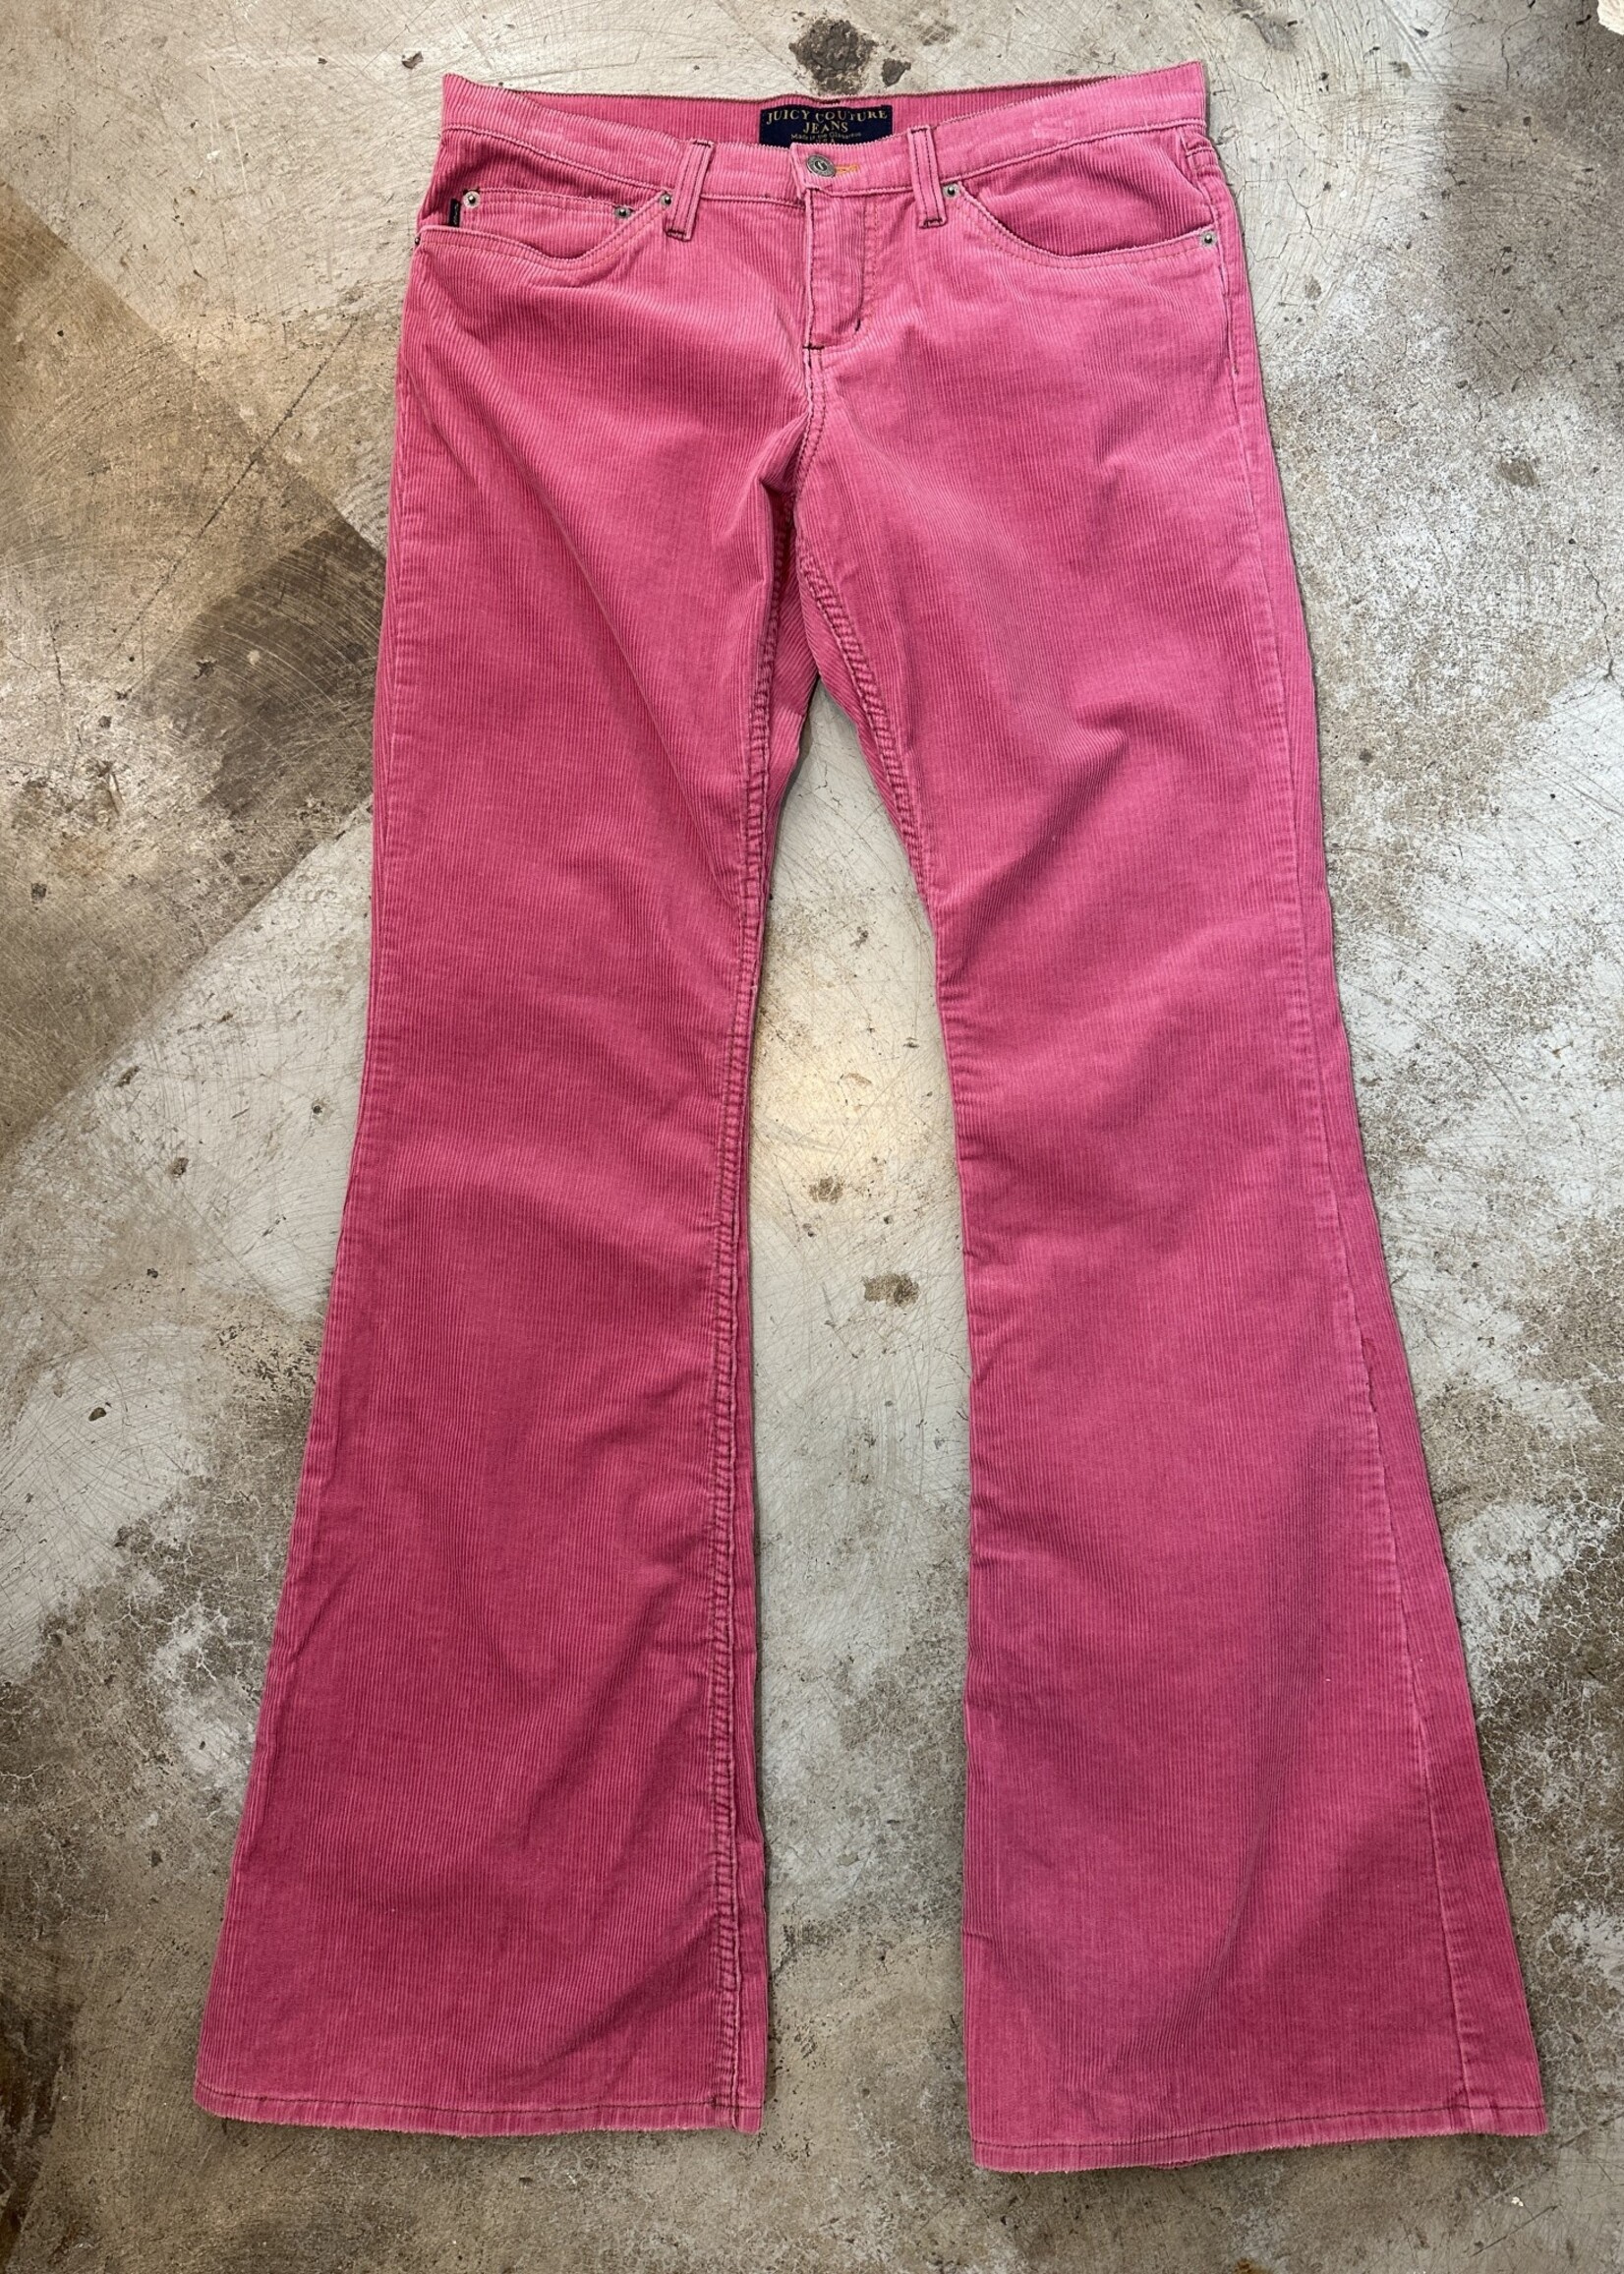 Juicy Couture Low Rise Pink Corduroy Flares 30